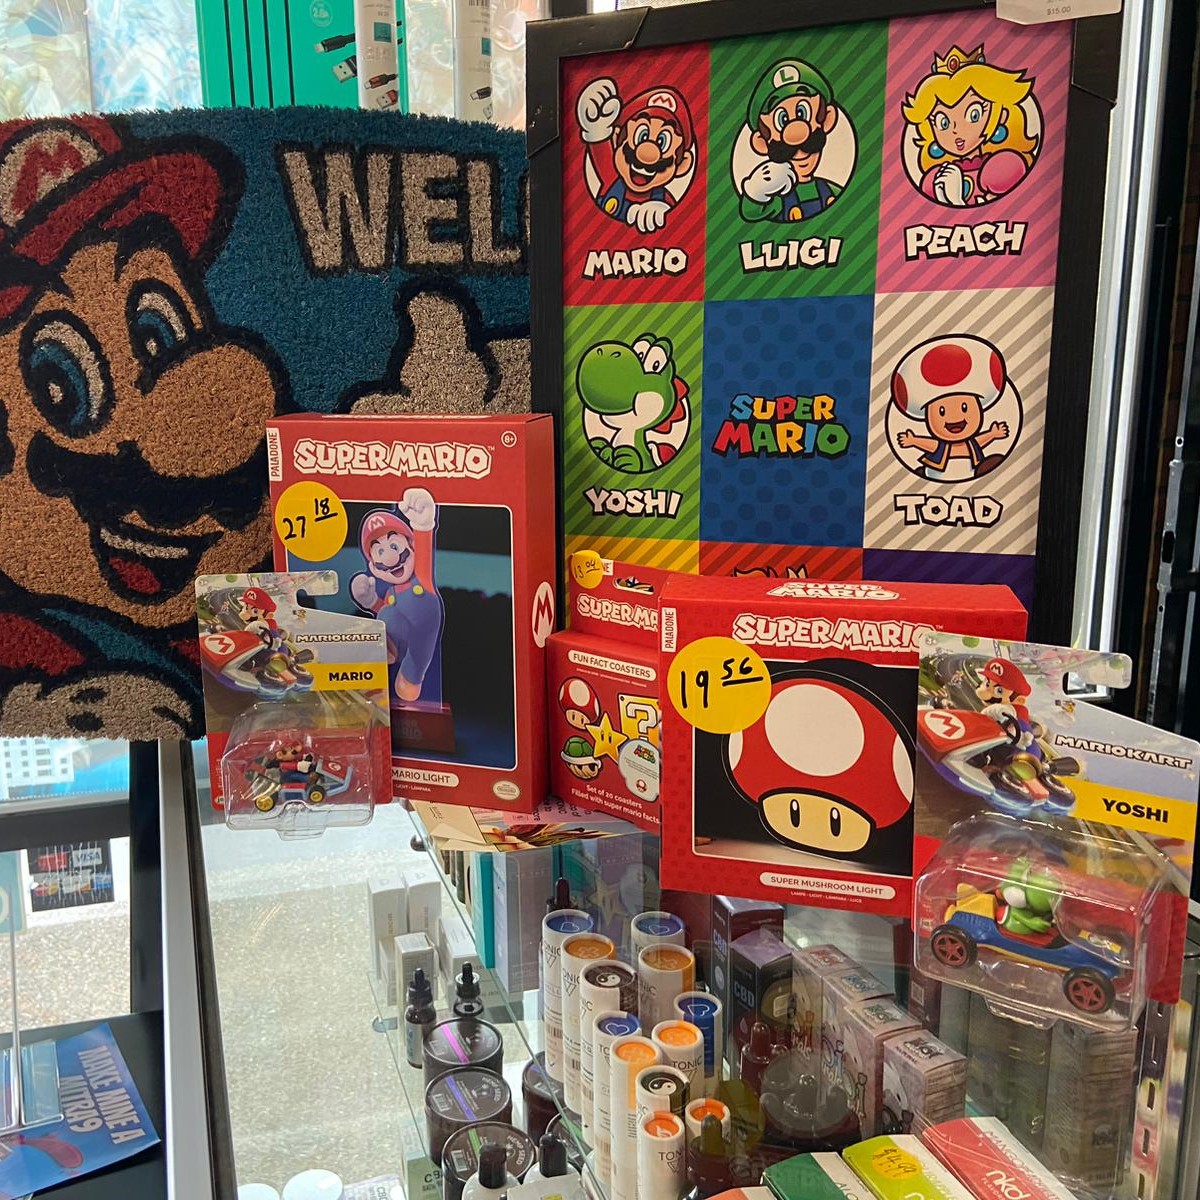 Do you want to take your gift game to the next level?  We have some awesome Mario gifts here at The Bloc. Come by from 9am to 9pm Monday-Saturday or 10am to 8pm on Sunday. #nerdygifts #sacramento #mario #mariobros